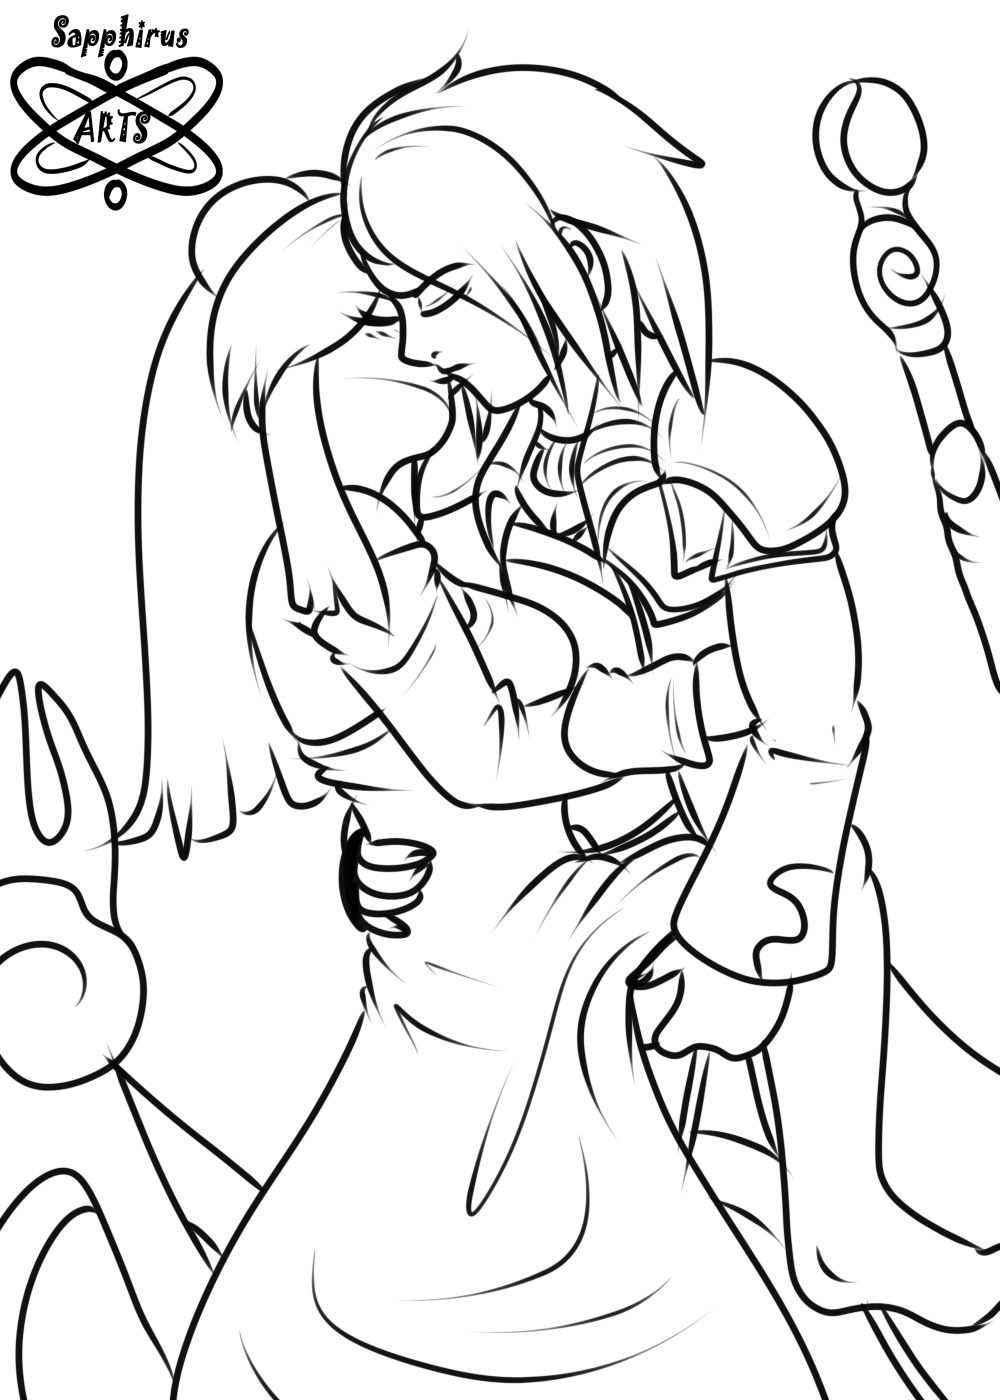 Jean and NeoAxel +Couple Commission WIP+